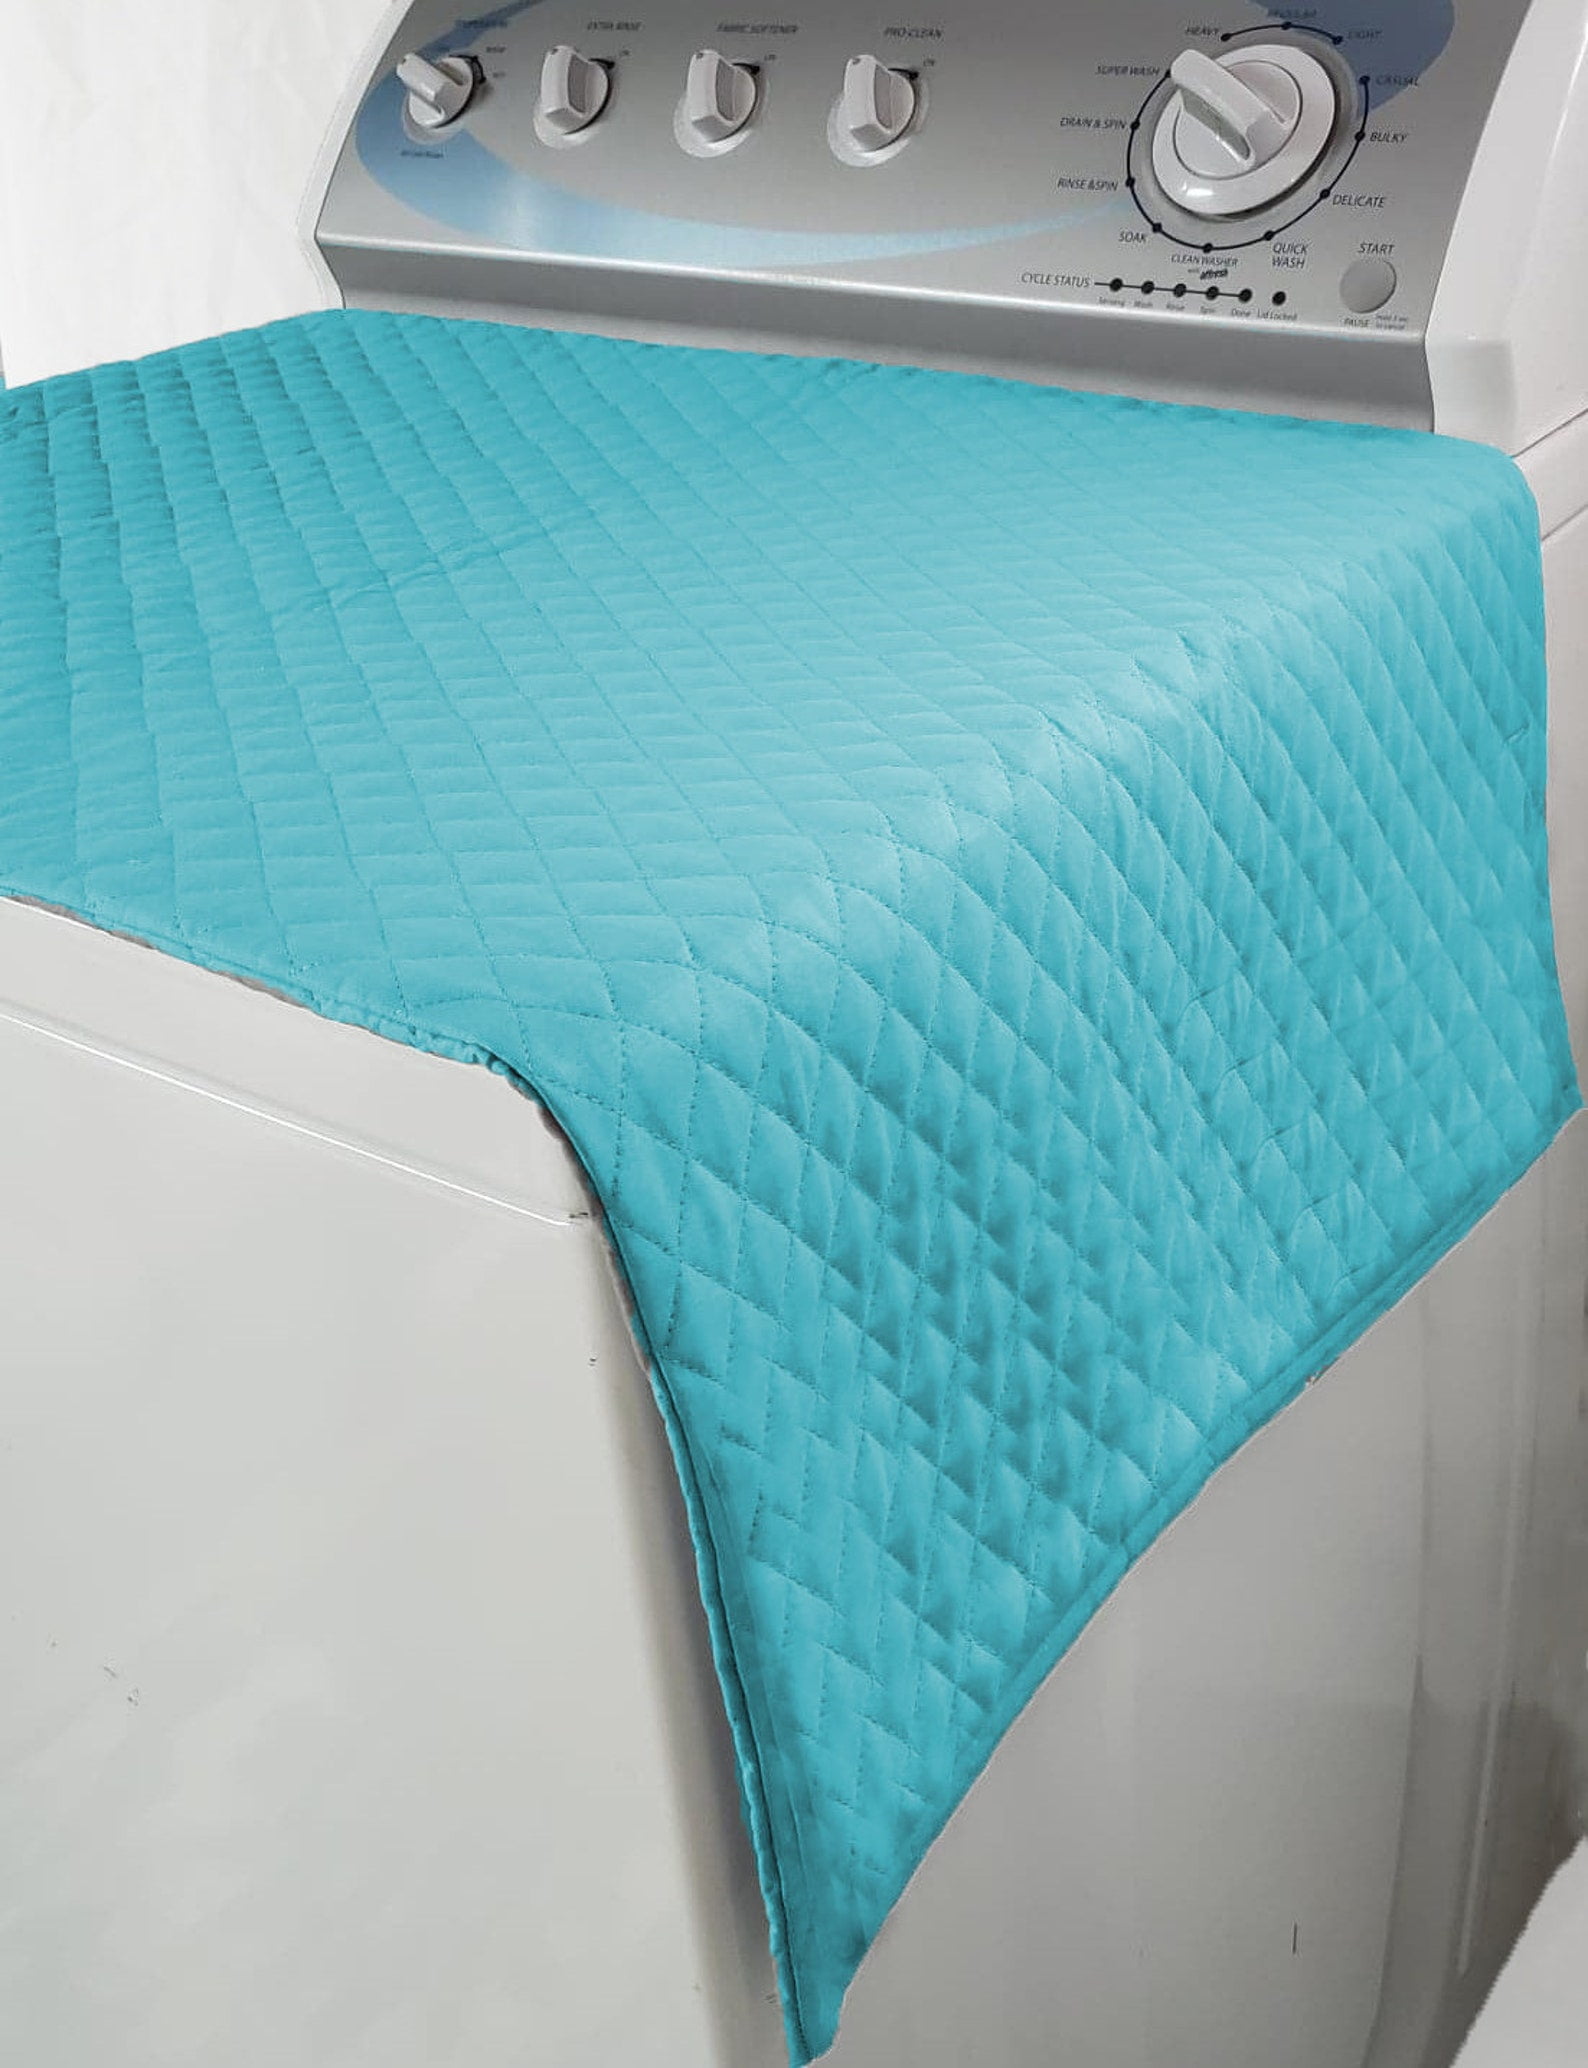 1PC Washer And Dryer Covers Protector Mat, Diatomaceous Washing Machine  Dryer Cover For The Top, Quick Drying And Highly Absorbent Washer And Dryer  To